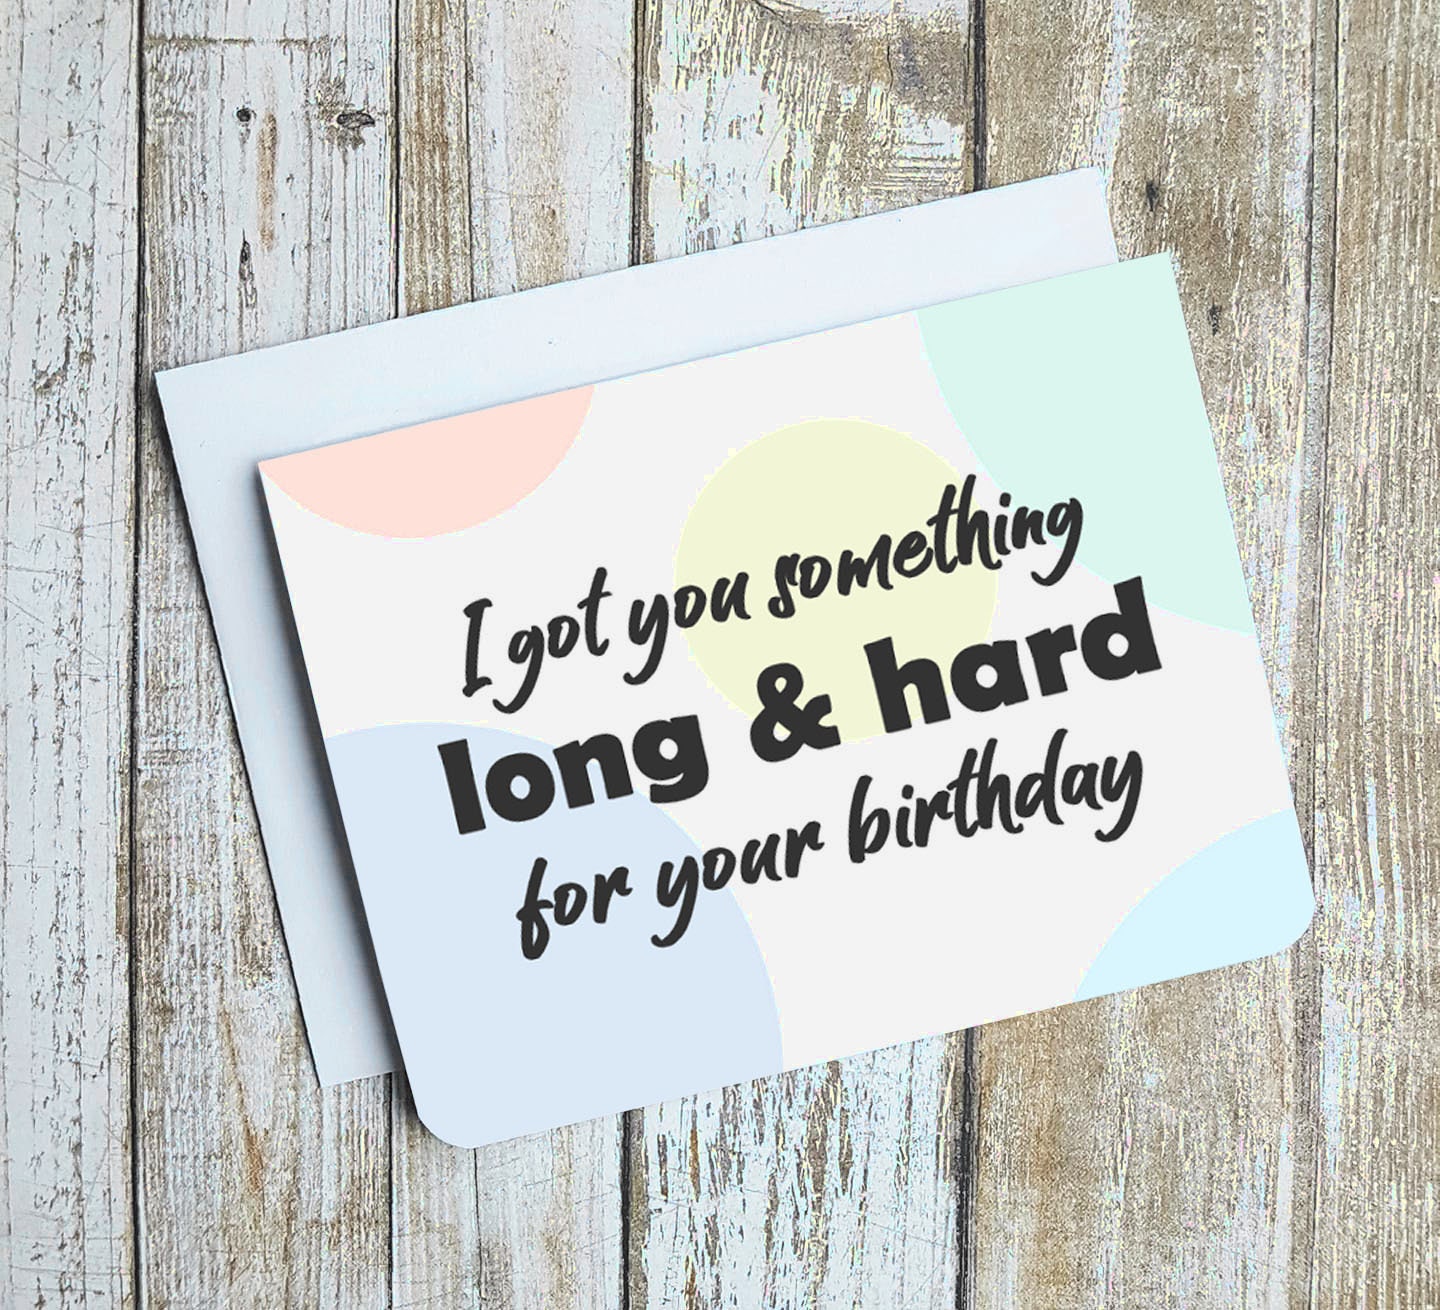 A photo of a birthday card. It has circles of pastel colours in the background. Text on card says, I got you something long & hard for your birthday.'